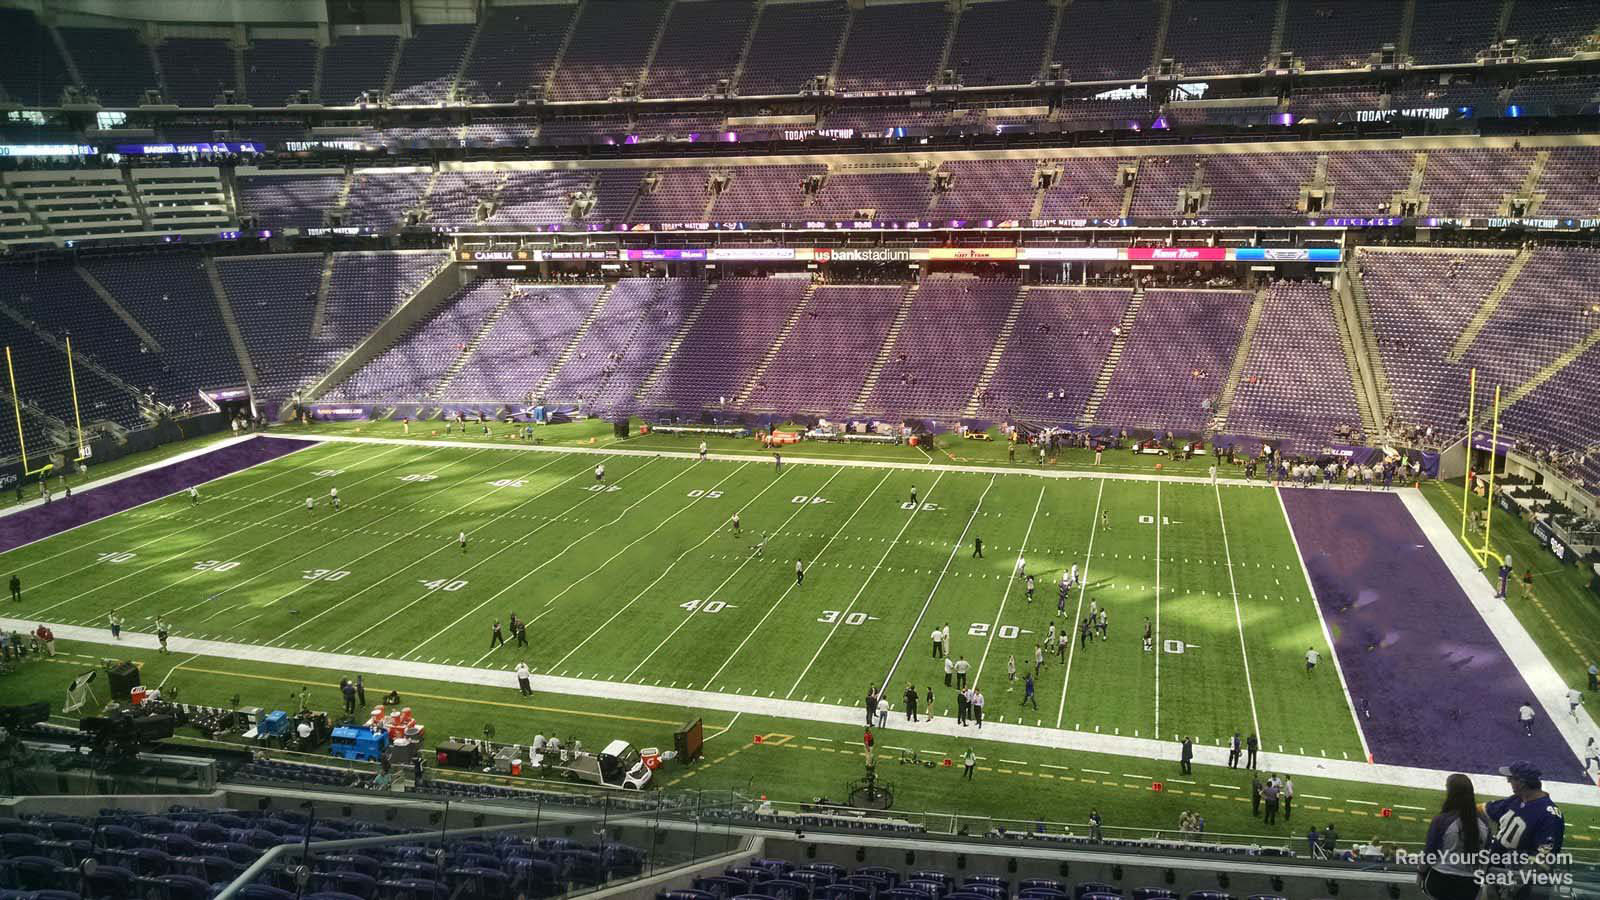 section 231, row 13 seat view  for football - u.s. bank stadium